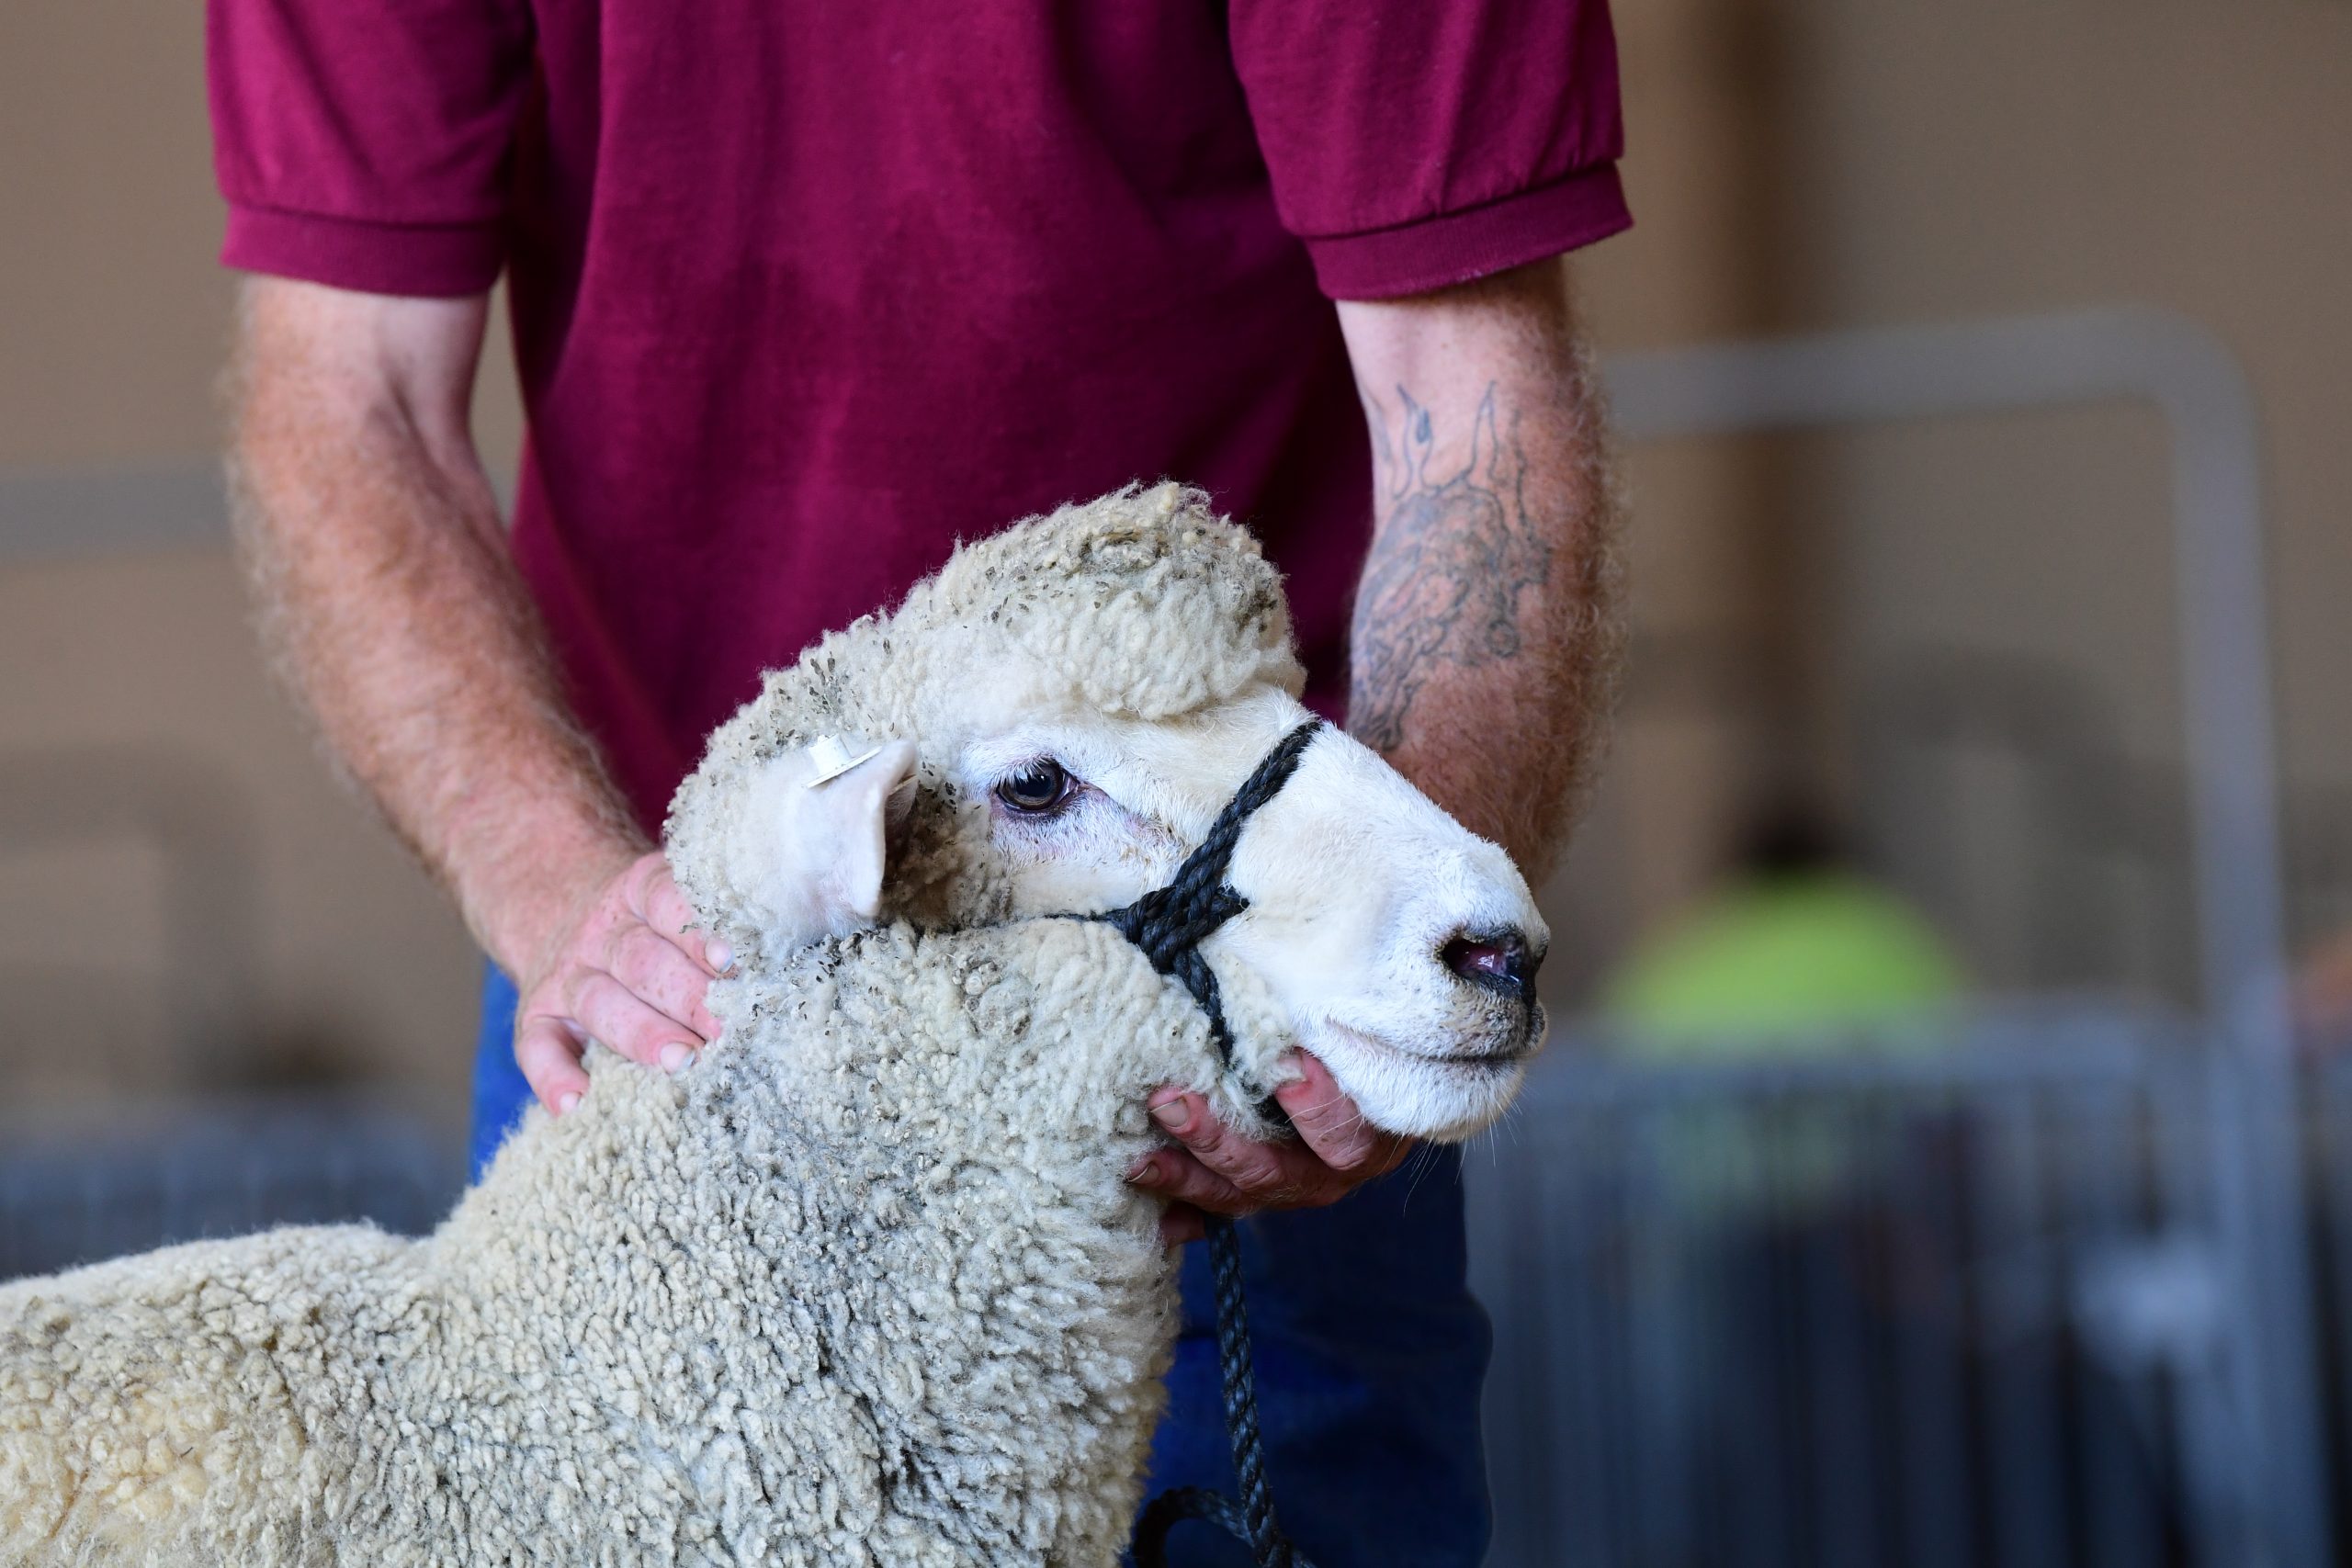 Sheep being held by a person